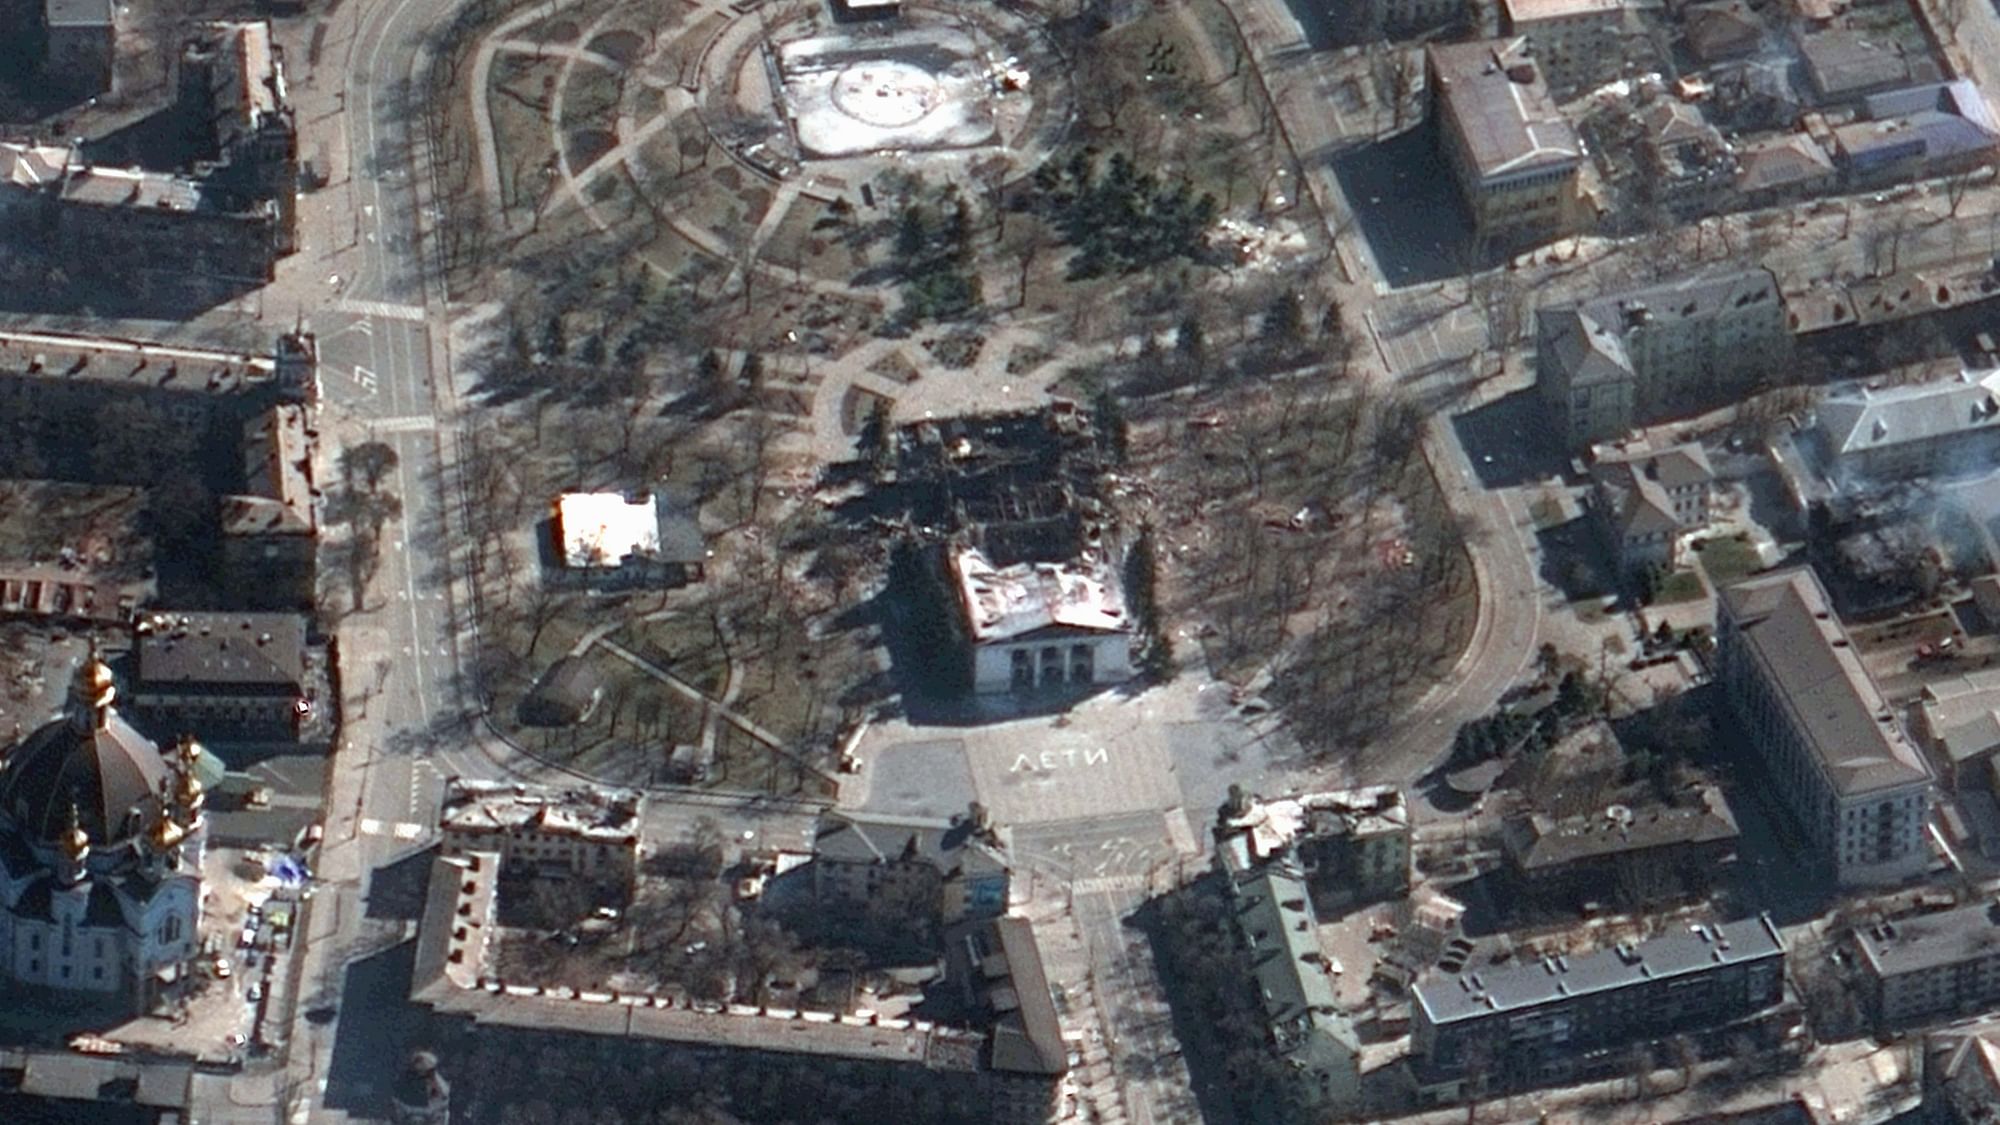 <div class="paragraphs"><p>Photo of the  Donetsk Regional Drama Theatre, a site that was being used as a shelter from Russian air raids by more than a thousand people. The theatre was&nbsp;<a href="https://www.thequint.com/news/world/ukraine-war-hundreds-feared-trapped-in-mariupol-theatre-hit-by-russian-airstrike">bombed</a>&nbsp;on 17 March.</p></div>